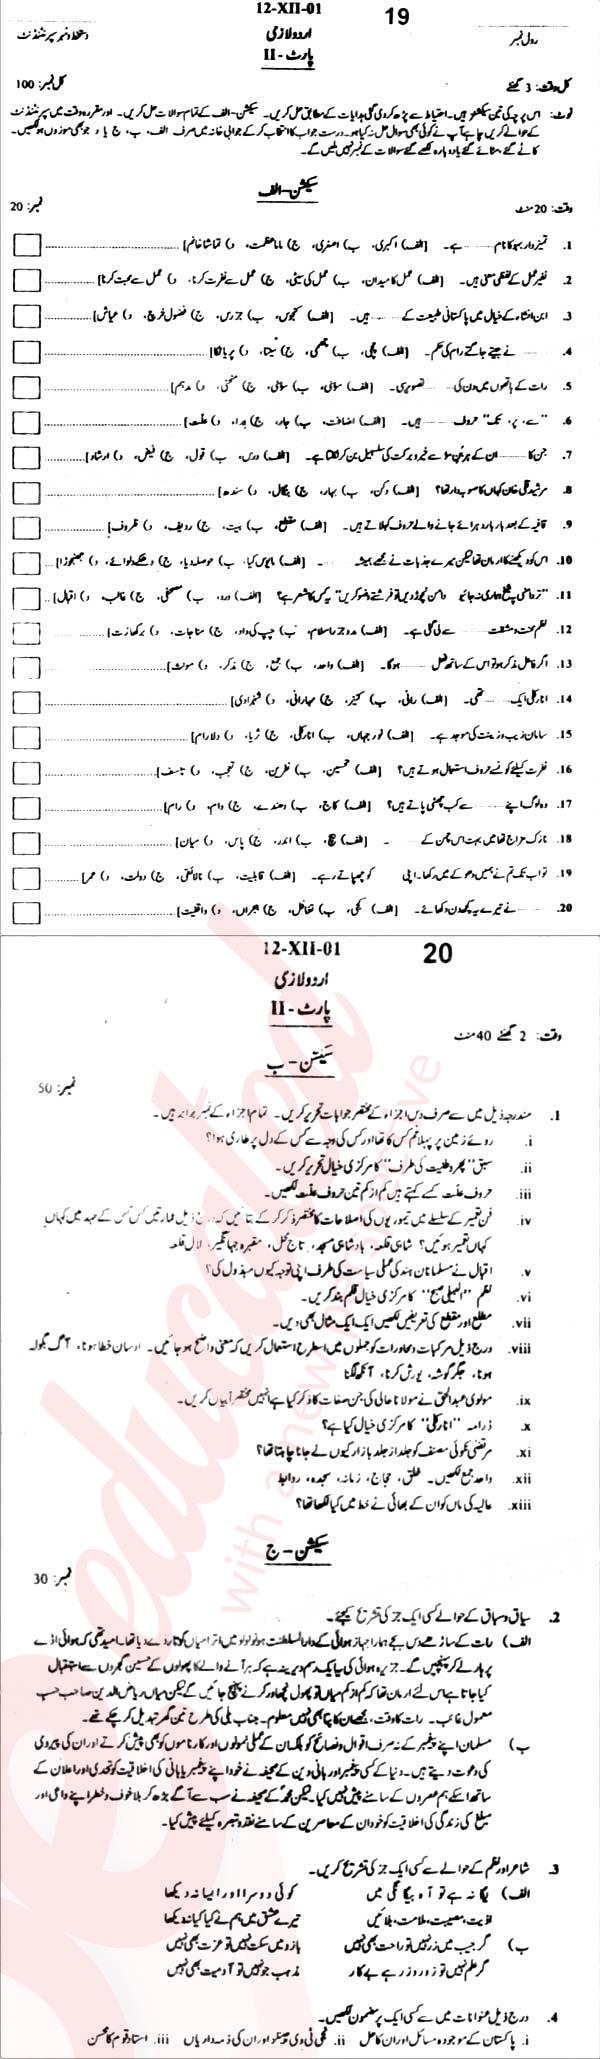 Urdu 12th class Past Paper Group 1 BISE Abbottabad 2012